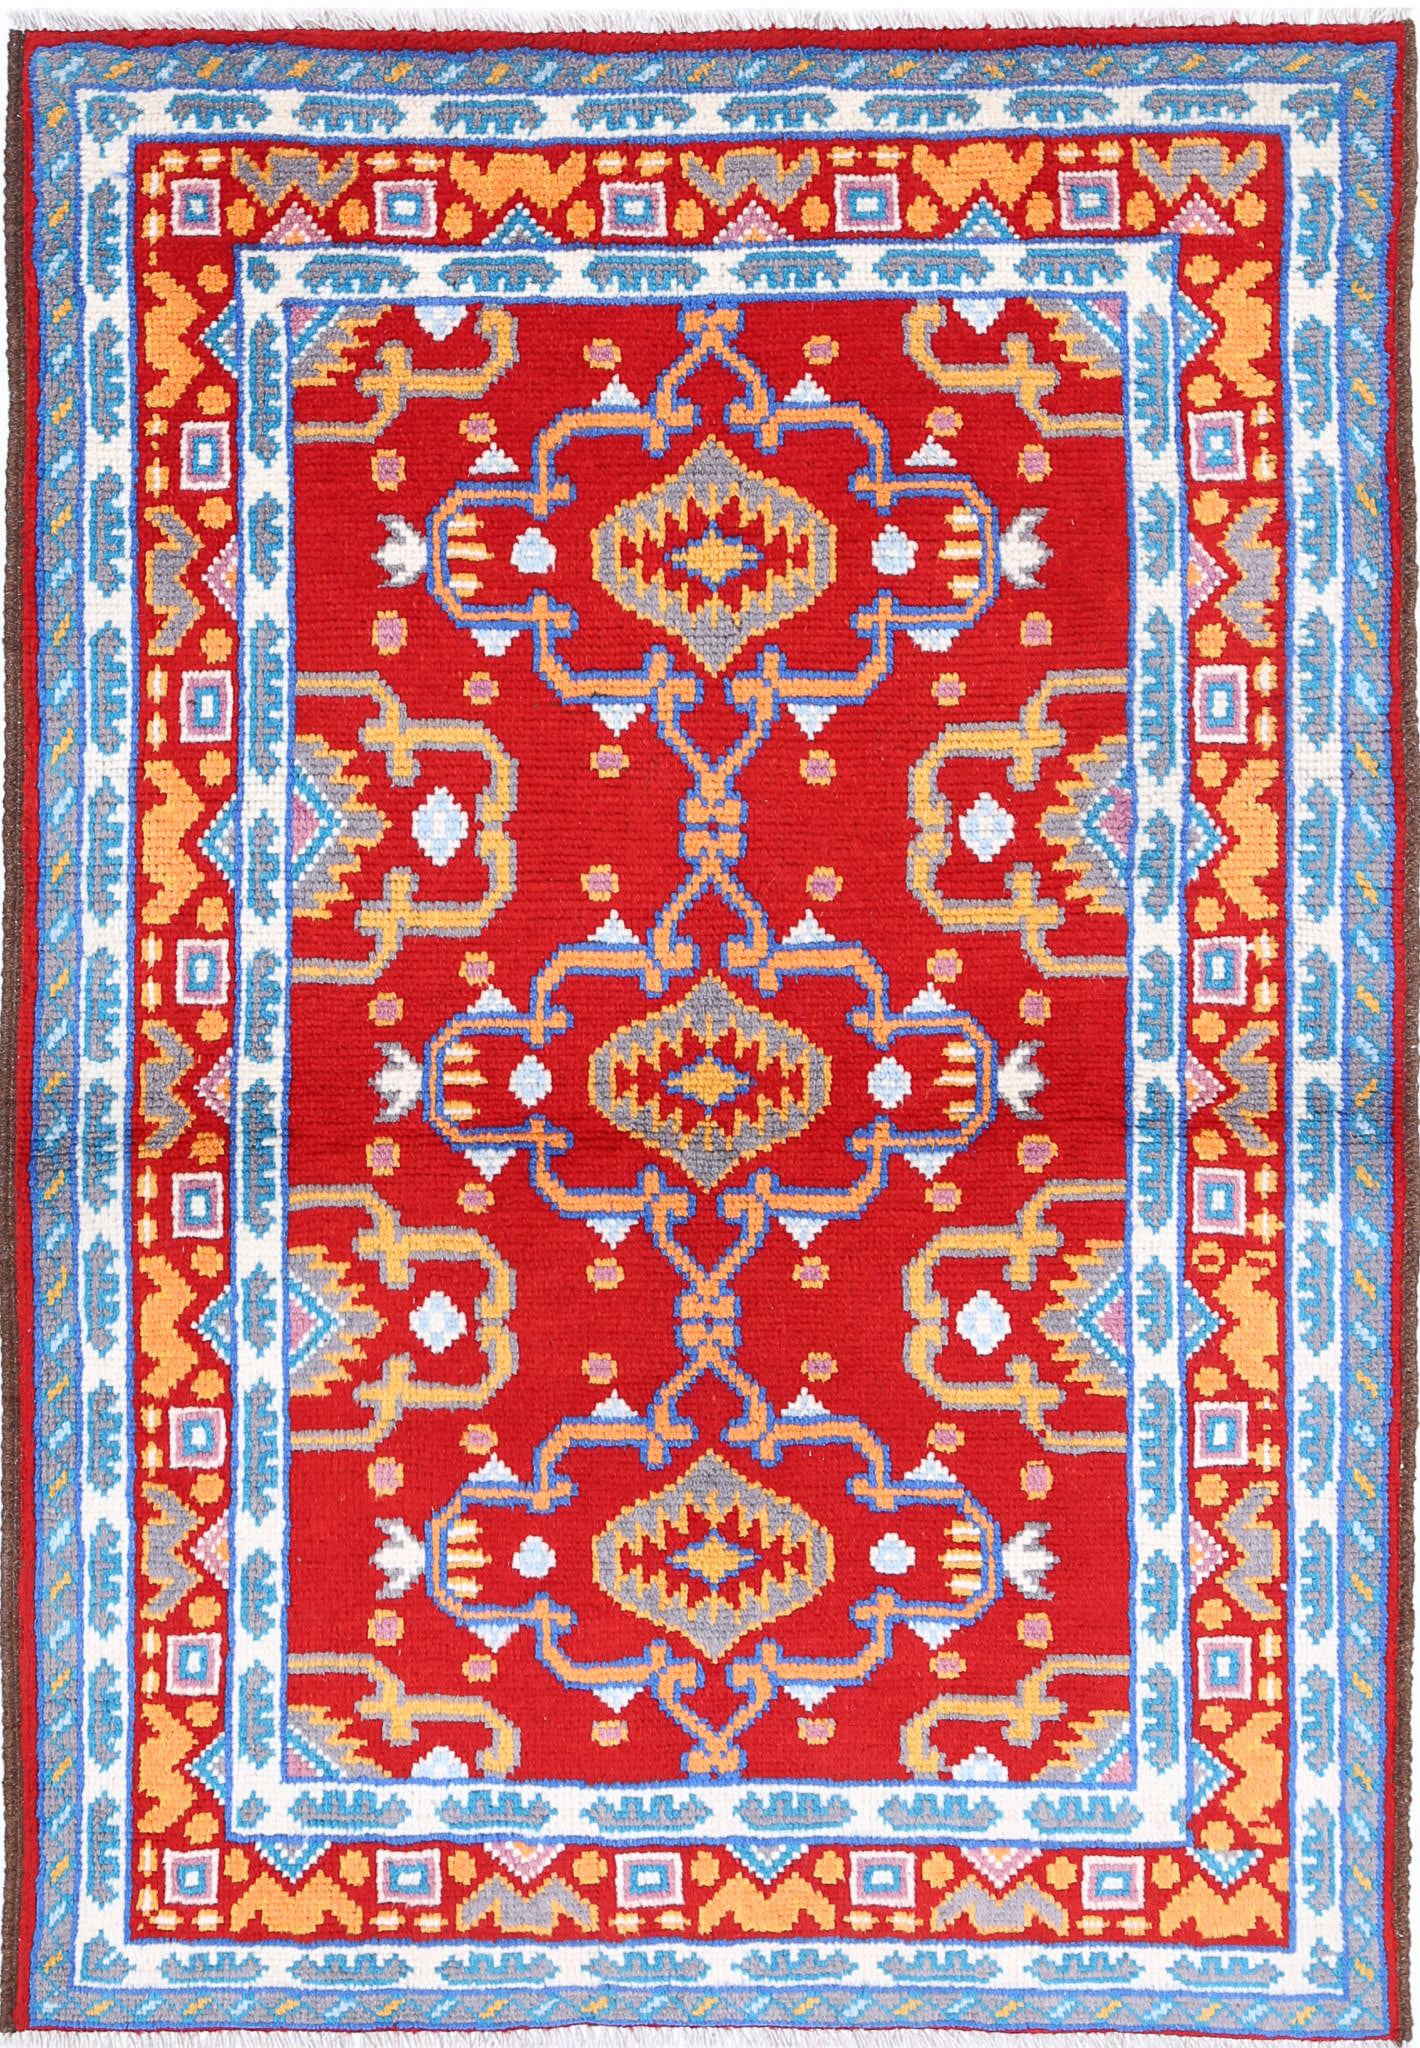 Revival-hand-knotted-qarghani-wool-rug-5014209.jpg